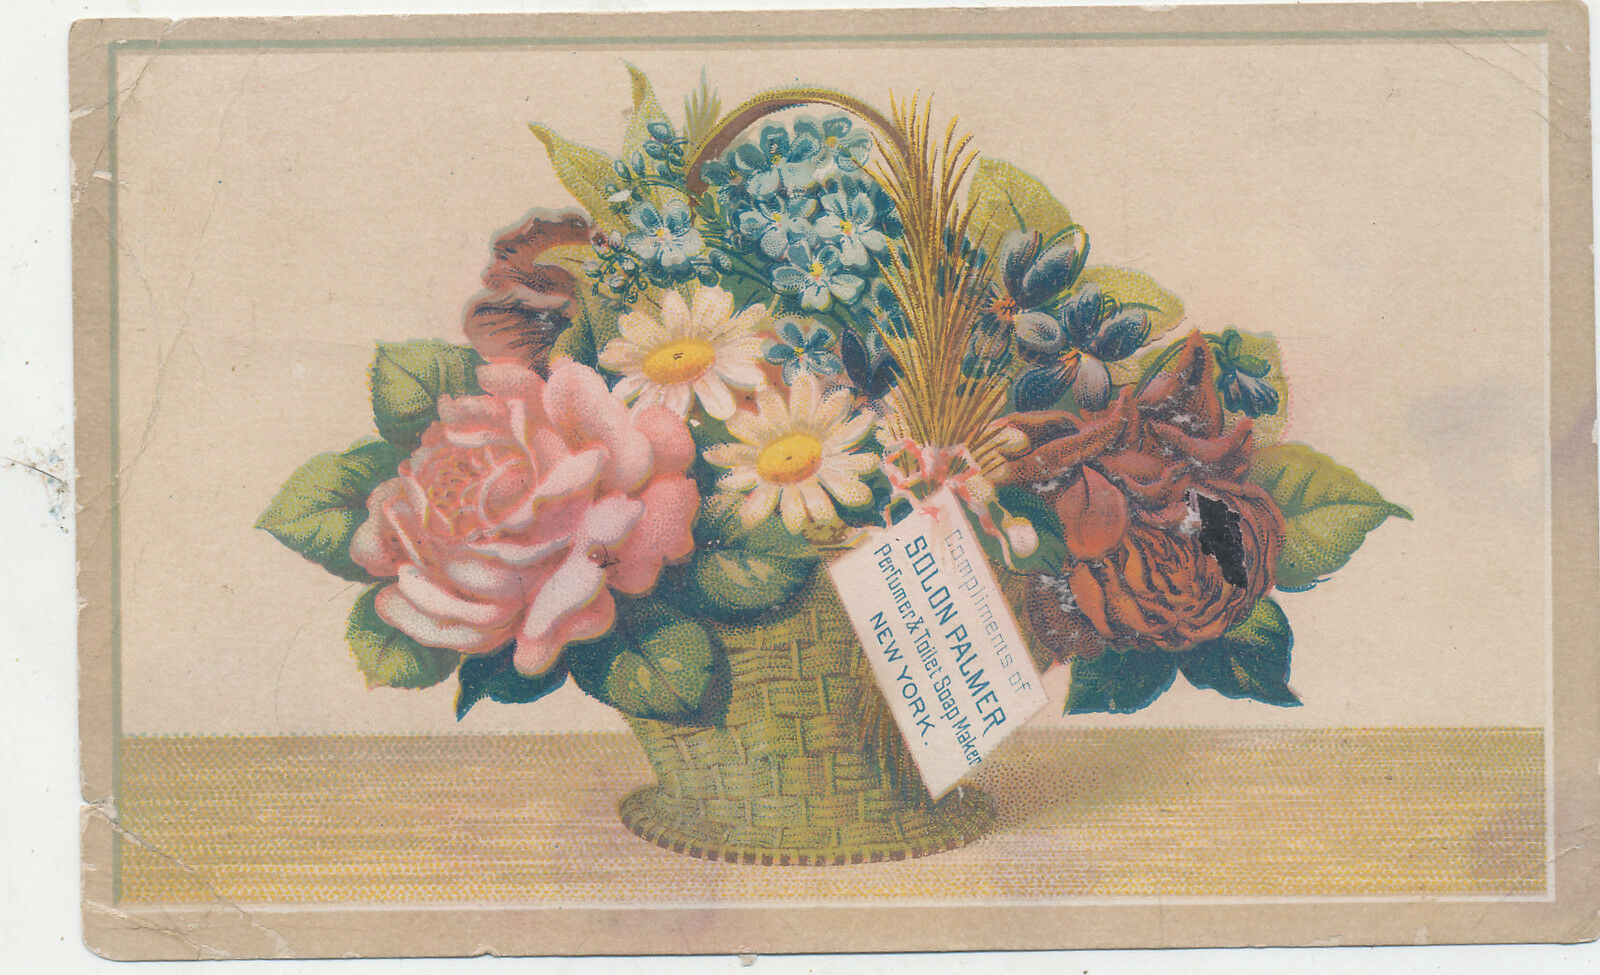 C9989  Victorian Trade Card   Palmers Lotion Soap Etc